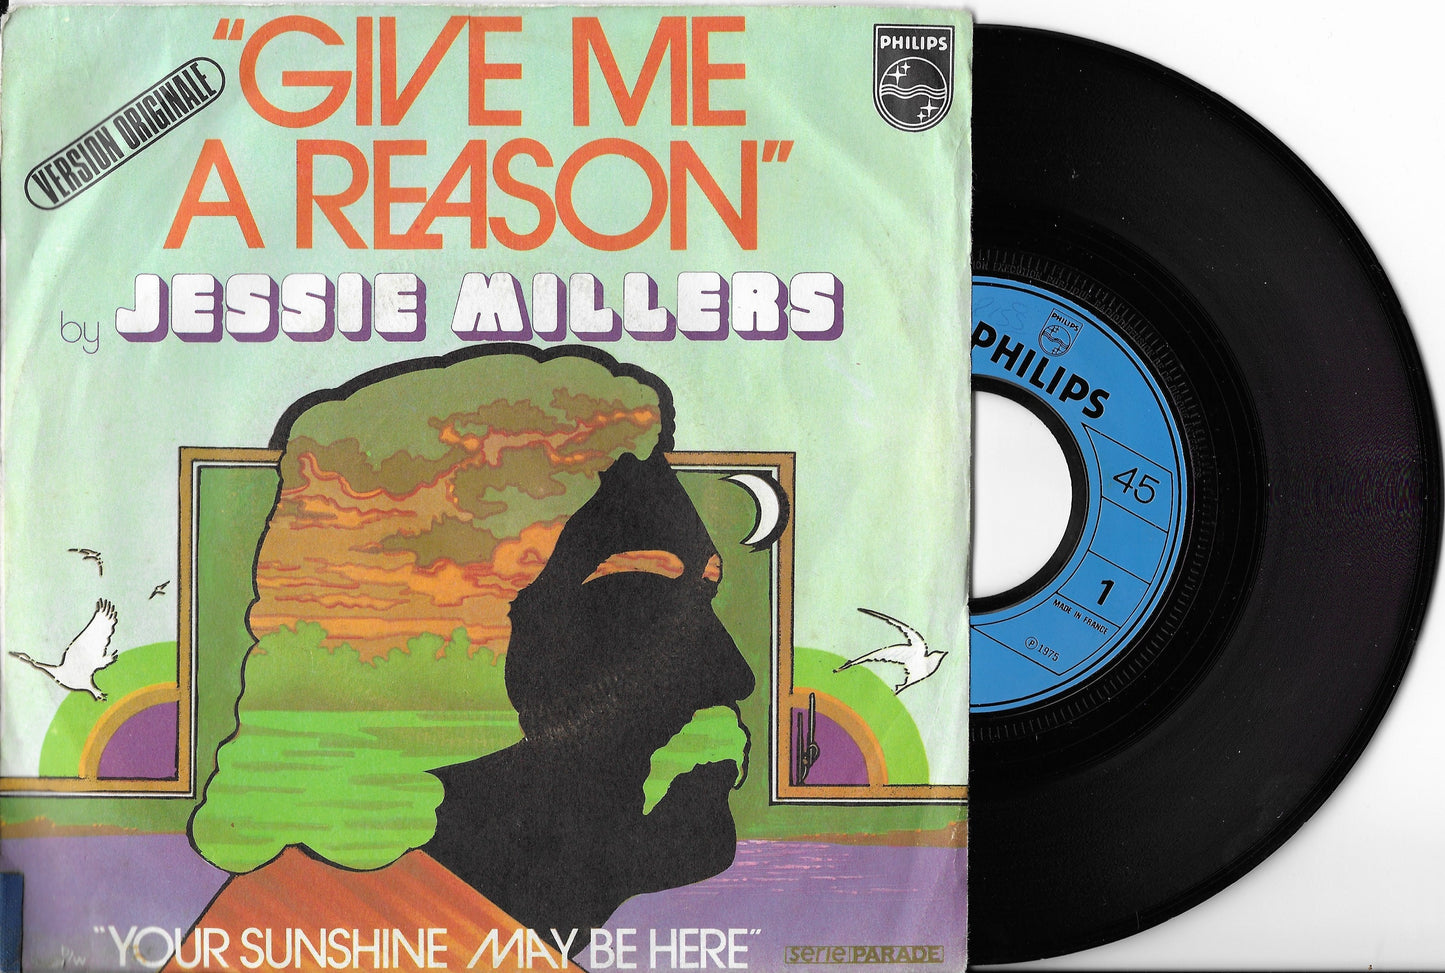 JESSIE MILLERS - Give Me A Reason / Your Sunshine May Be Here